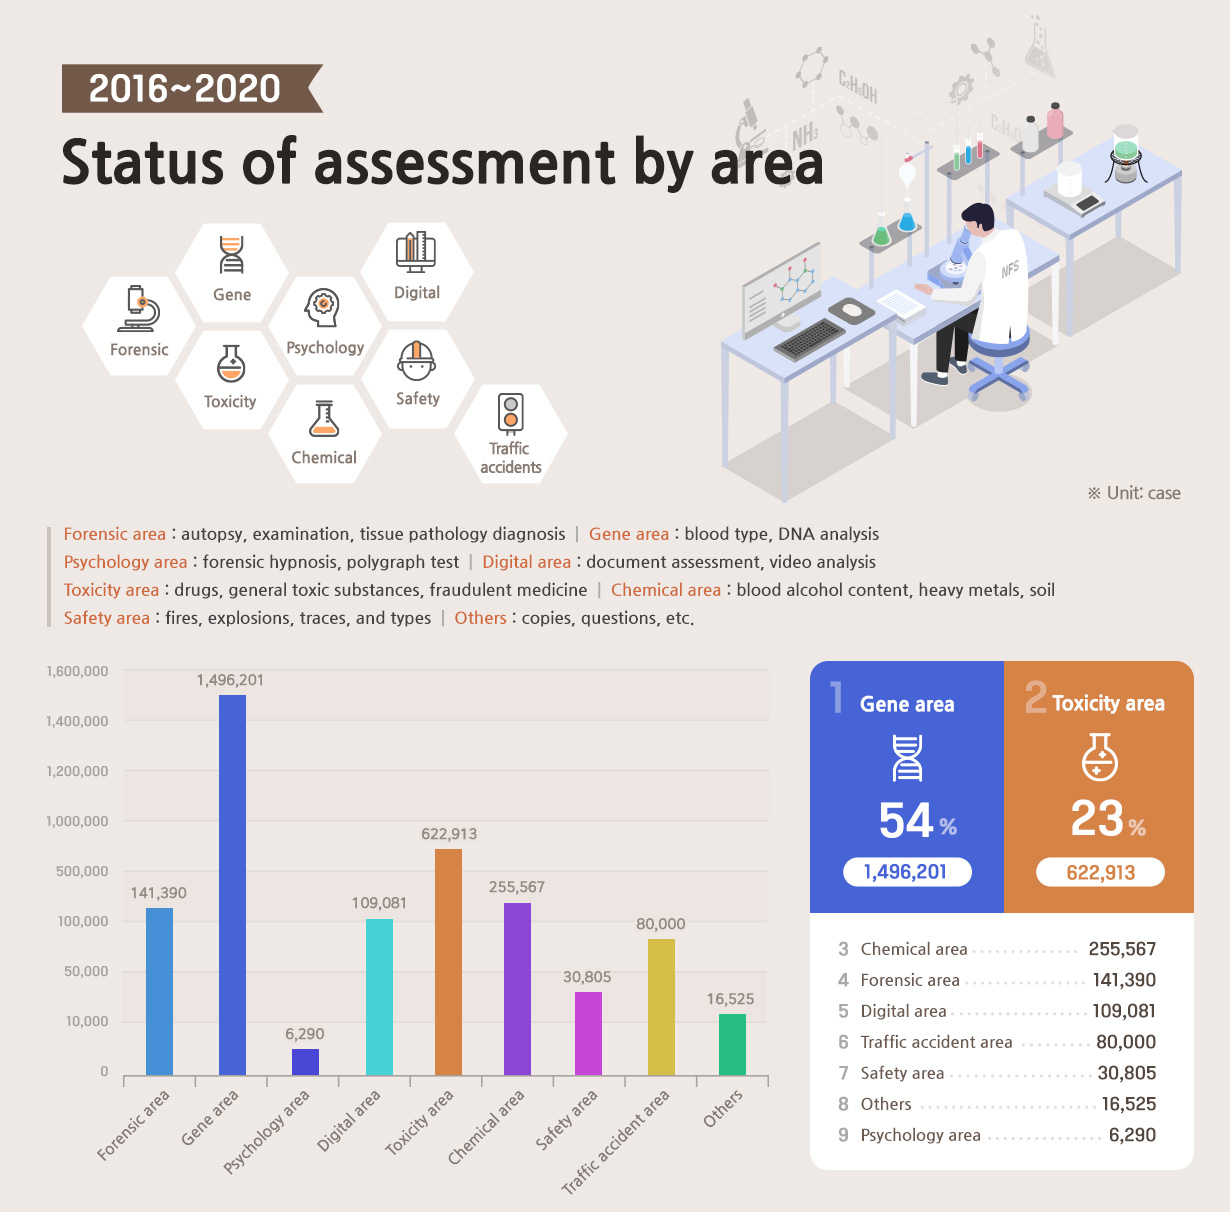 2016~2020 Status of assessment by area 이미지